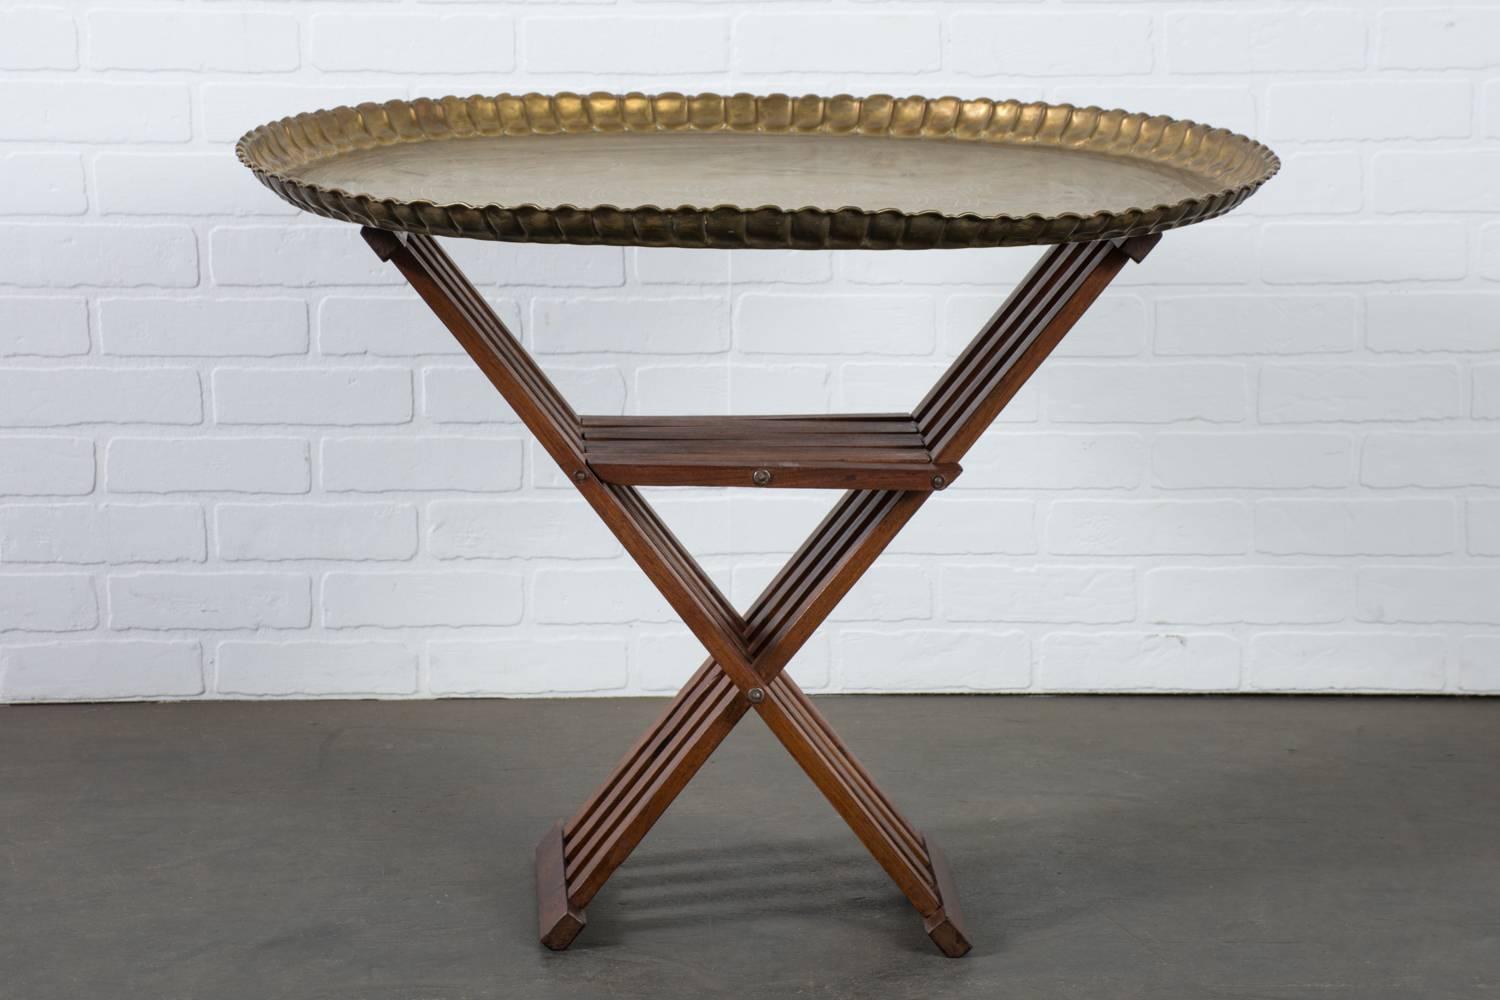 This vintage Mid-Century Moroccan brass tray table has a folding rosewood slat base. Label on the table base reads Fink.